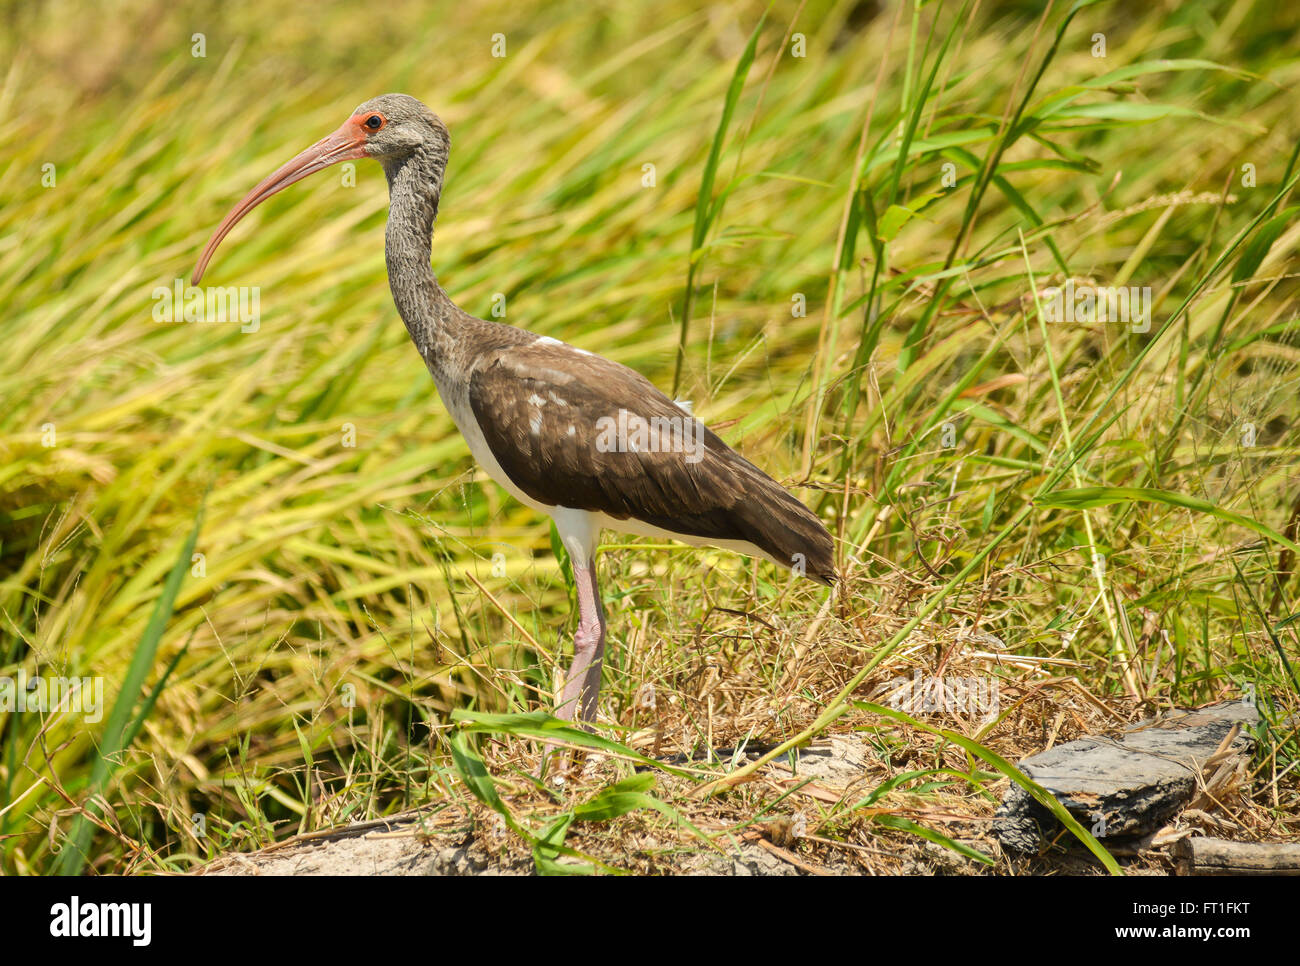 Immature White Ibis walking on a rice field looking for food Stock Photo